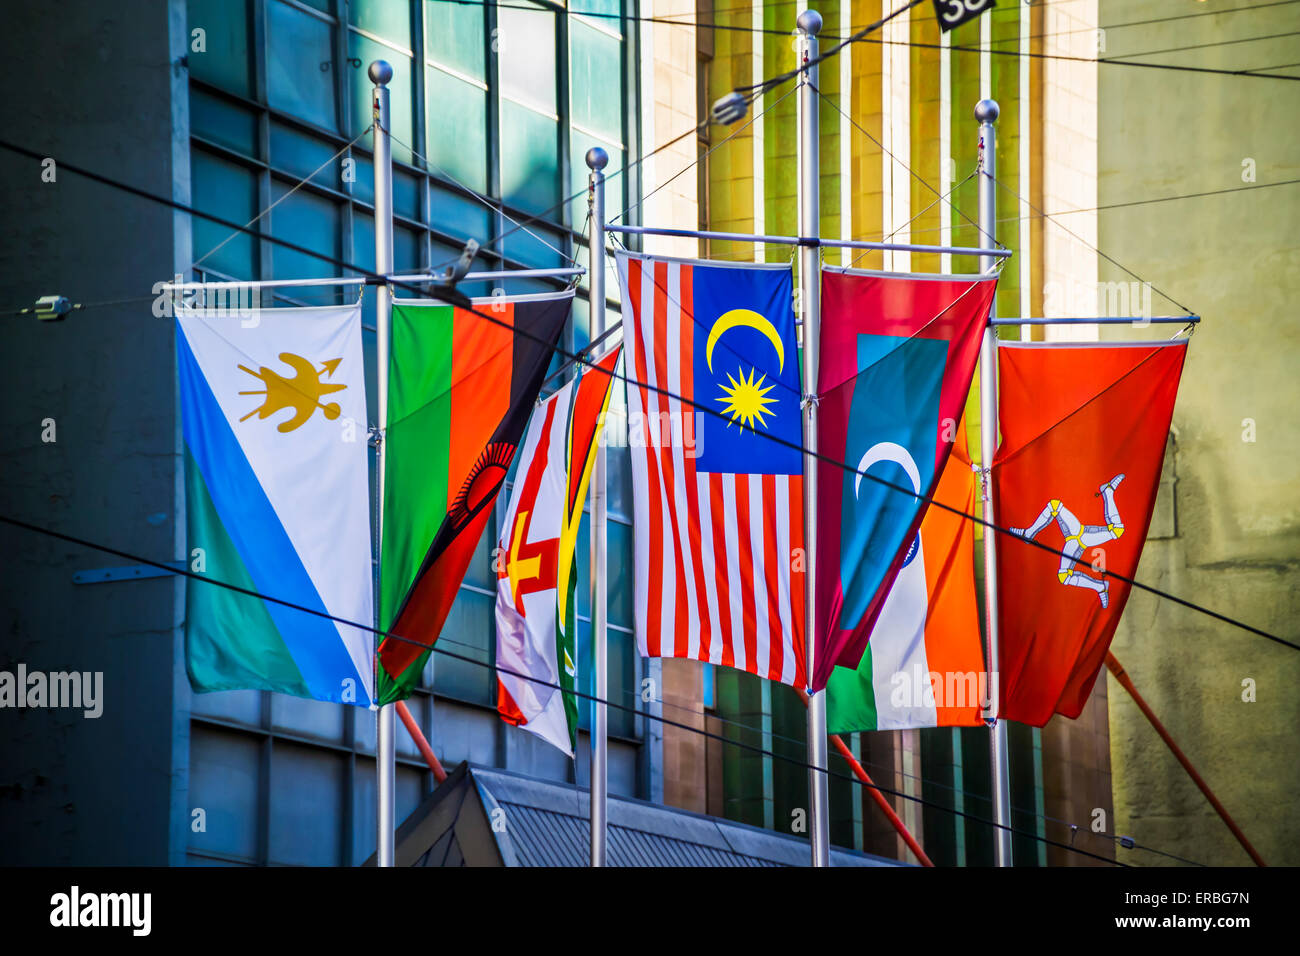 Colourful flags of the World, Nations flags hanging in Bourke Street, Melbourne, Australia Stock Photo